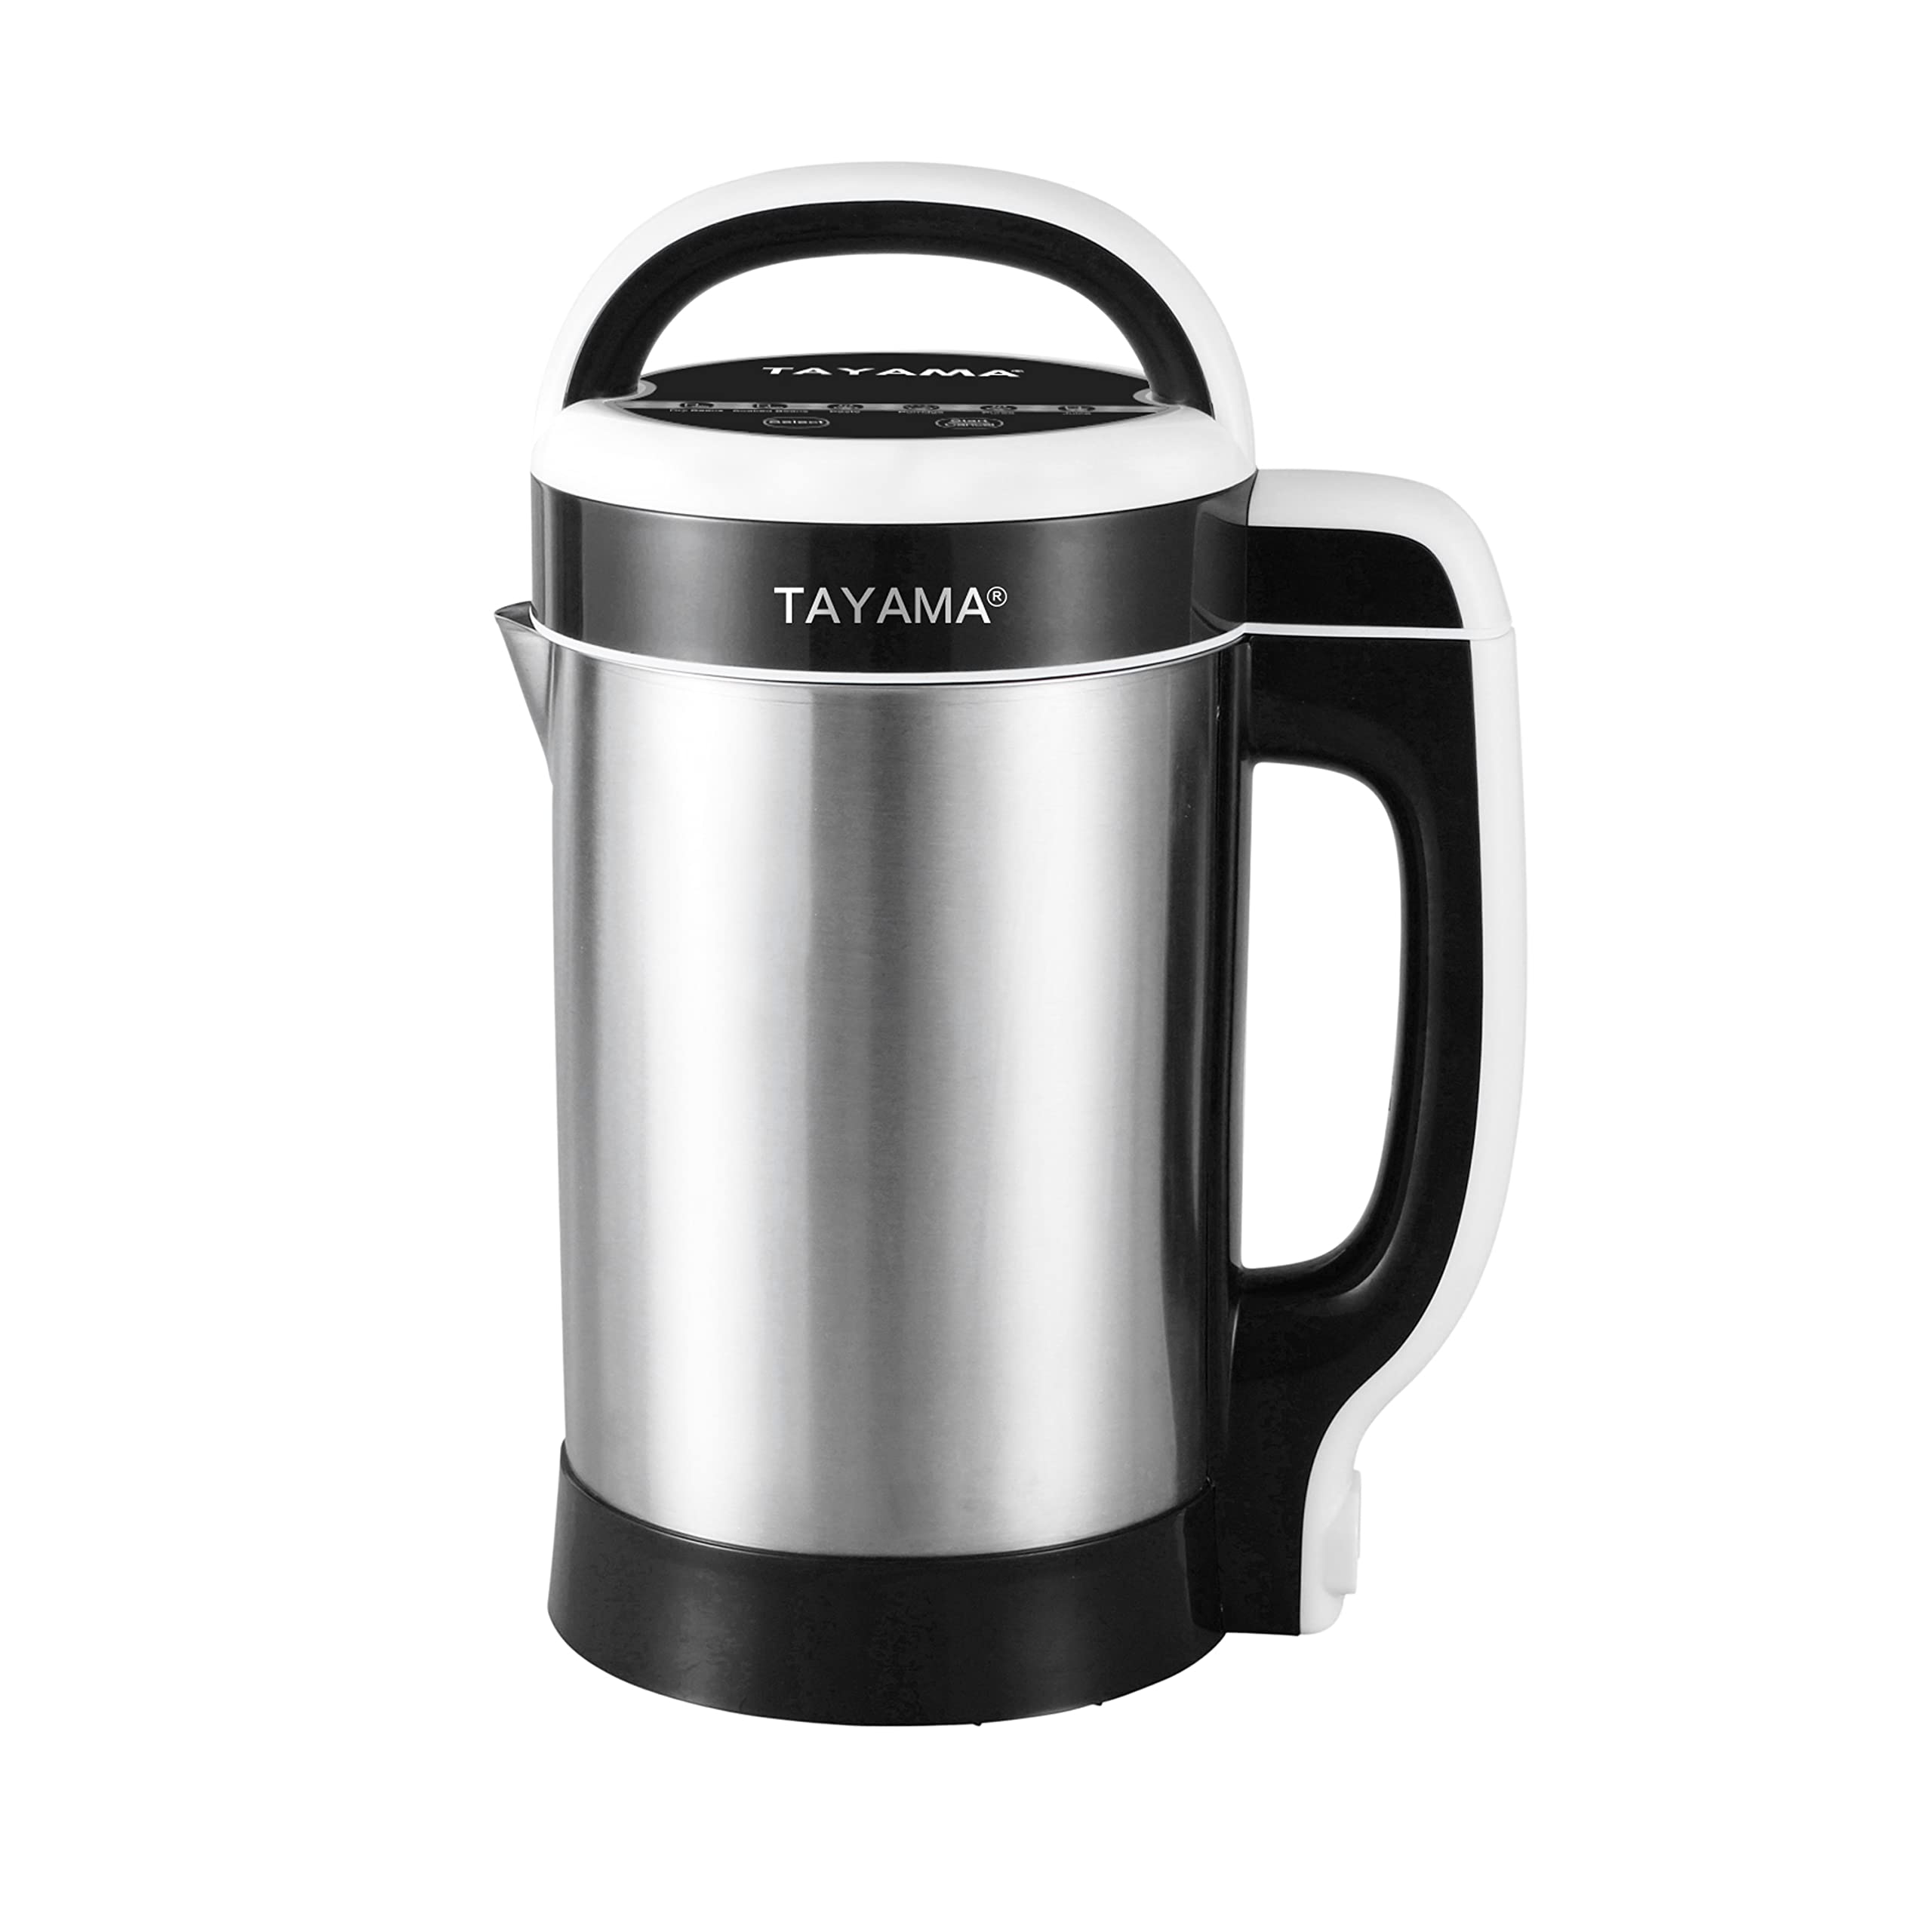 A stainless steel pot with a handle on a white background.